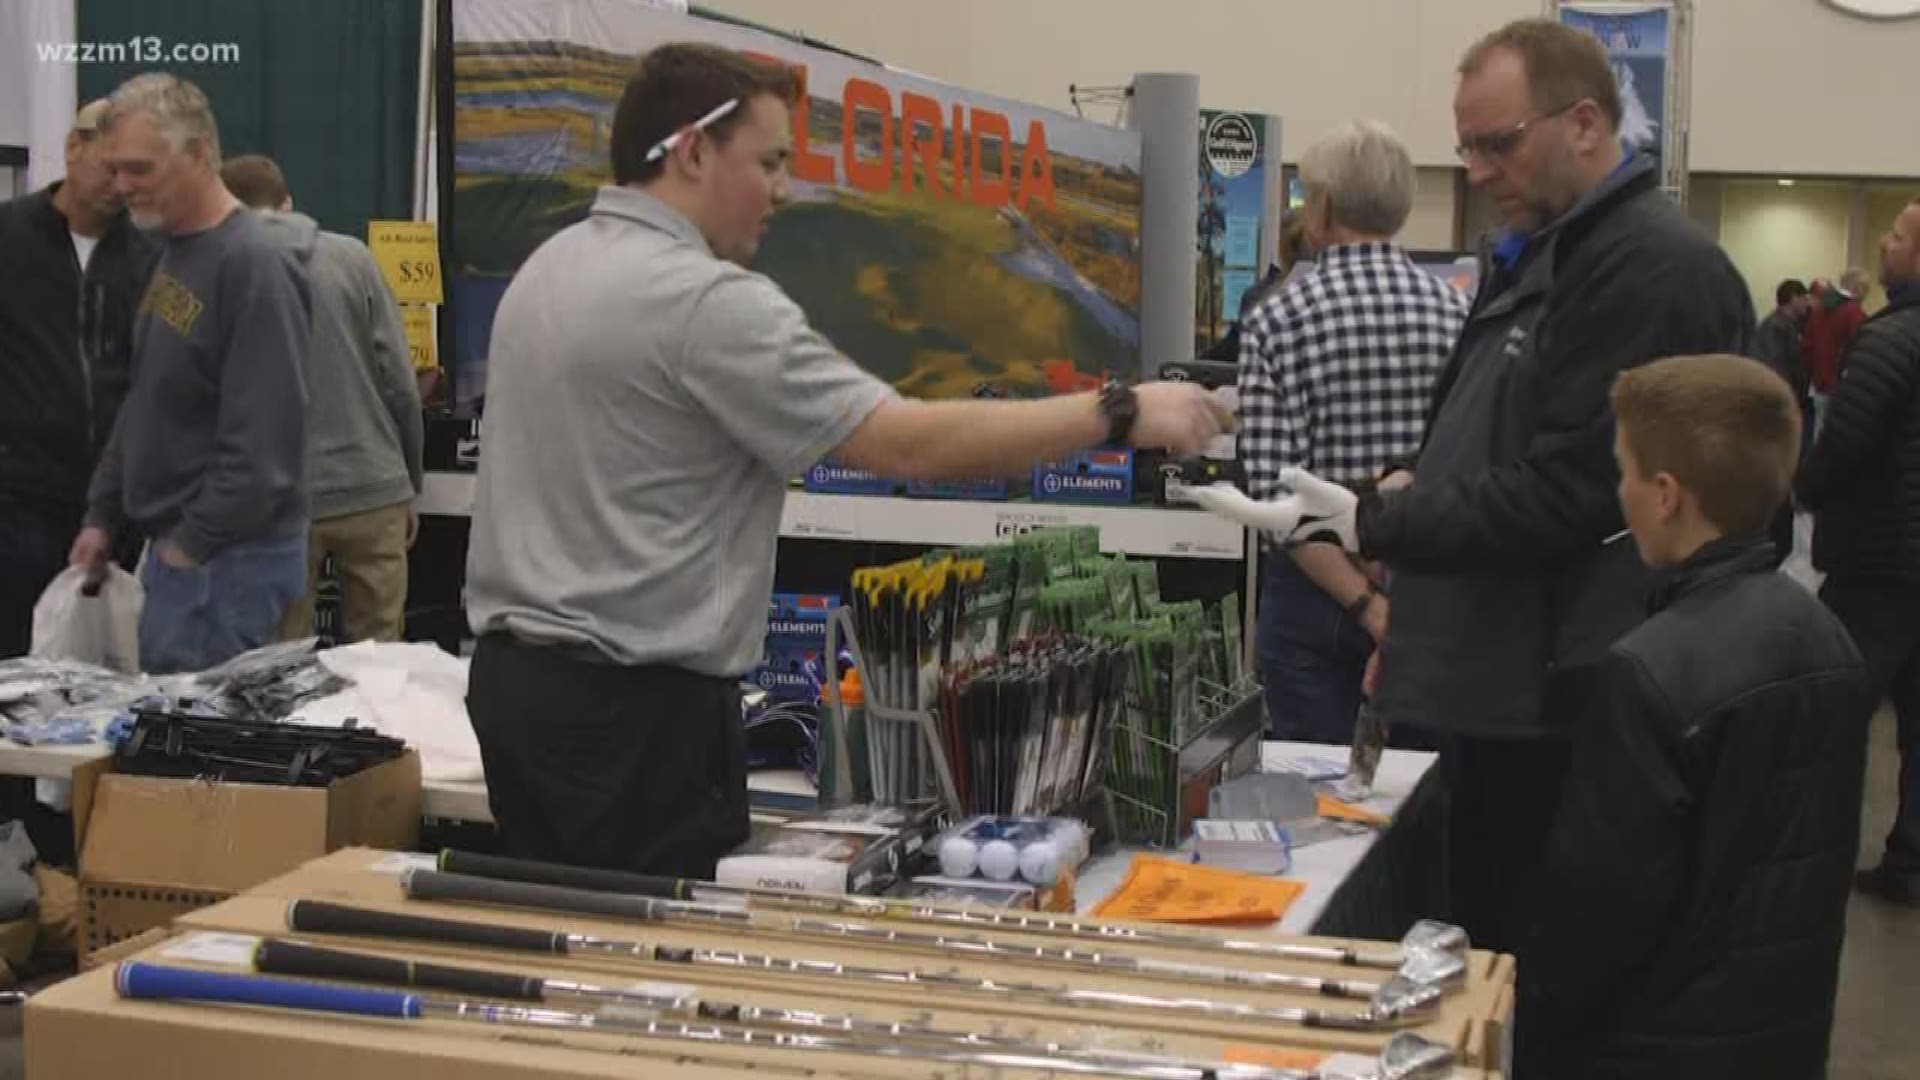 Itching for spring? Get a taste of it at the West Michigan Golf Show this weekend